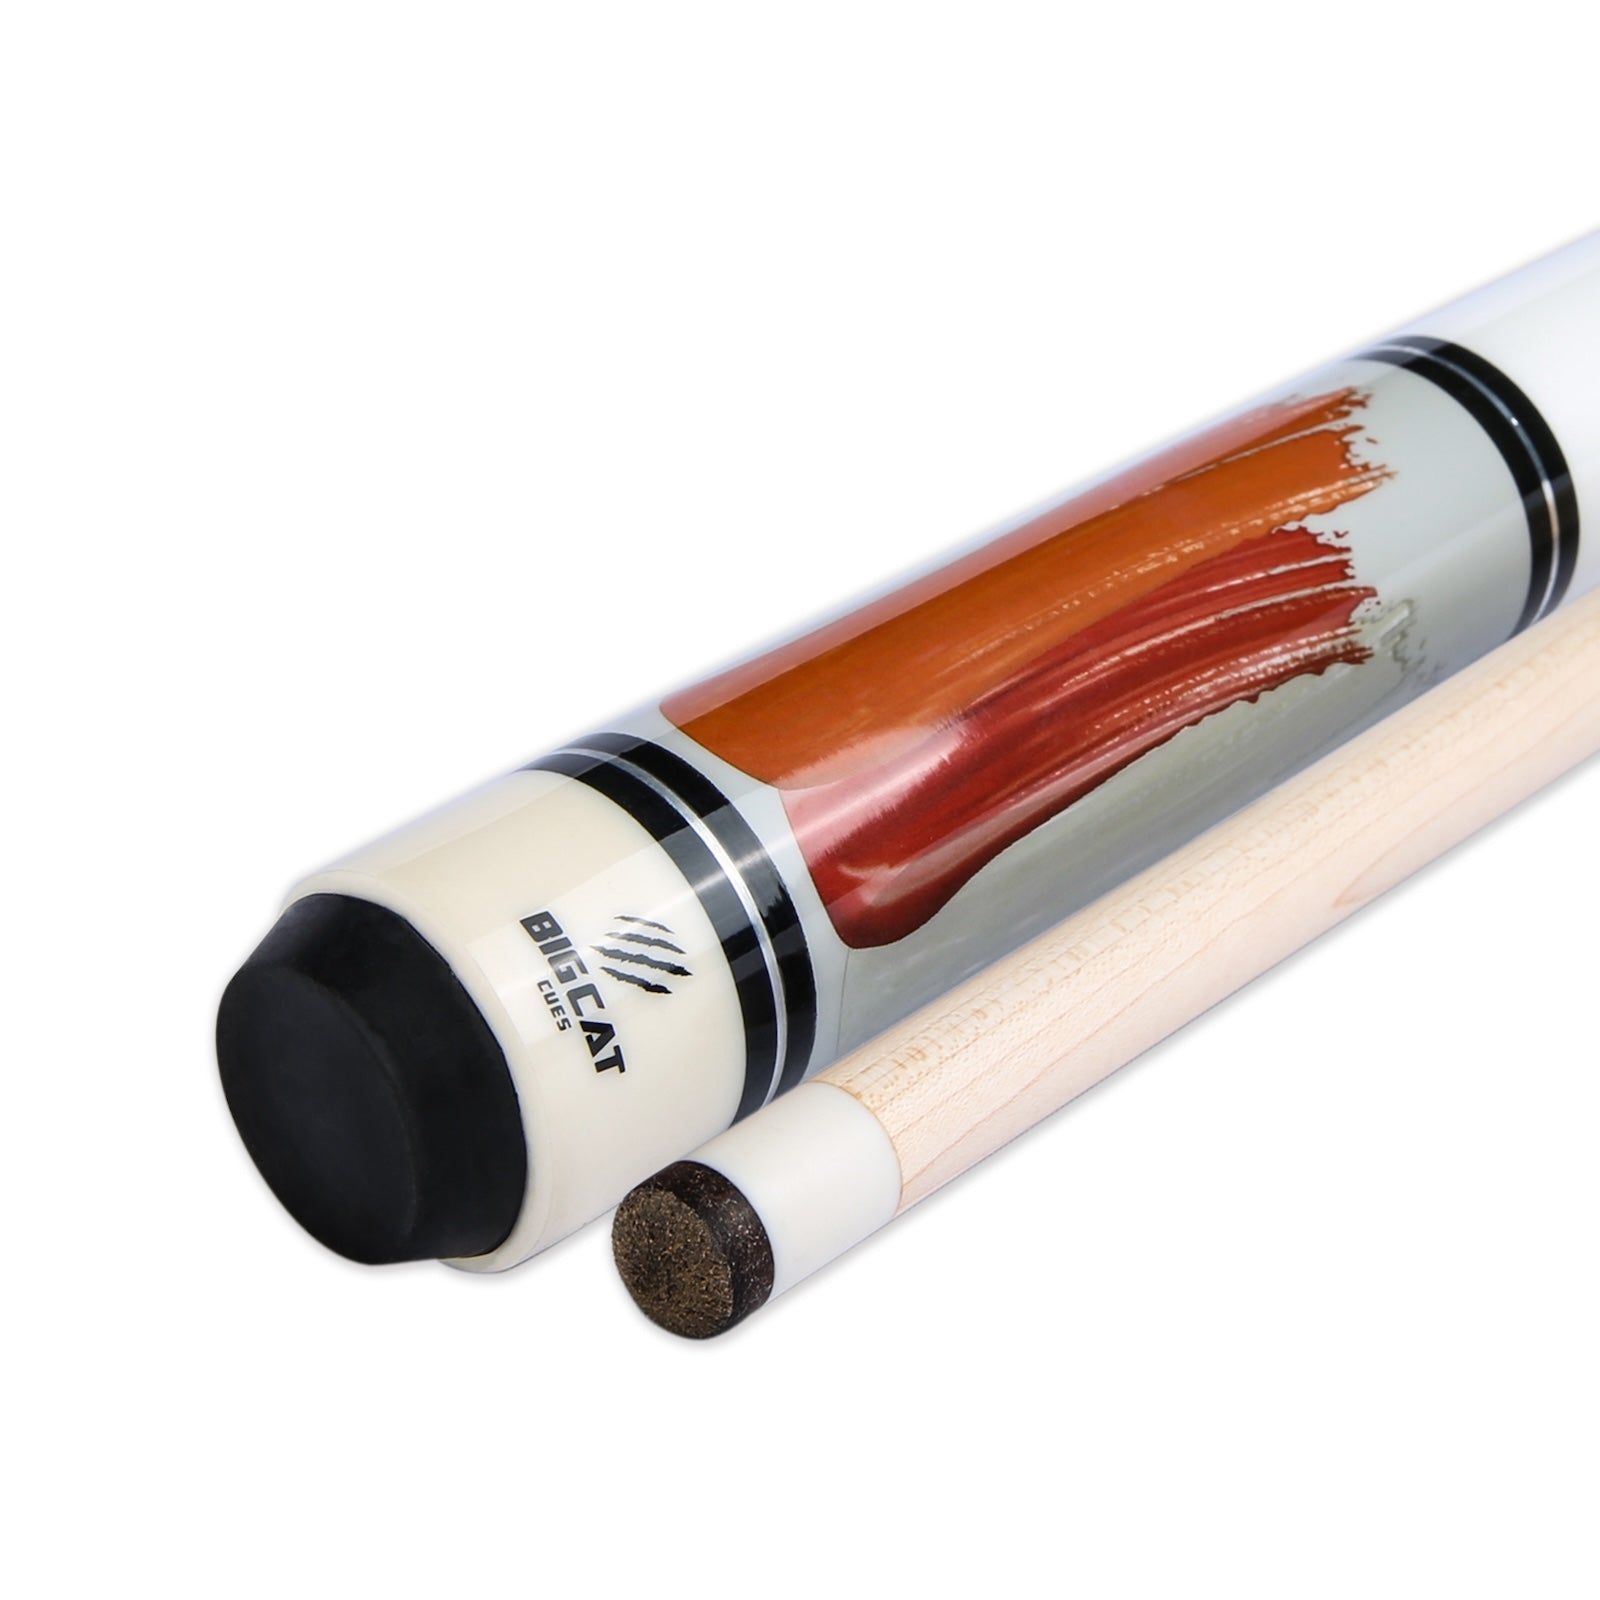 Big Cat Paint I Invigorate Pool Cue Stick - 18/19/20/21 oz, Big Cat Professional Leather tip, 12.5mm, 58" Length, Billiard Pool Cue Sticks for Men, Ideal for Home or Commercial/Bar Settings, Premium Quality Grade A Canadian Maple